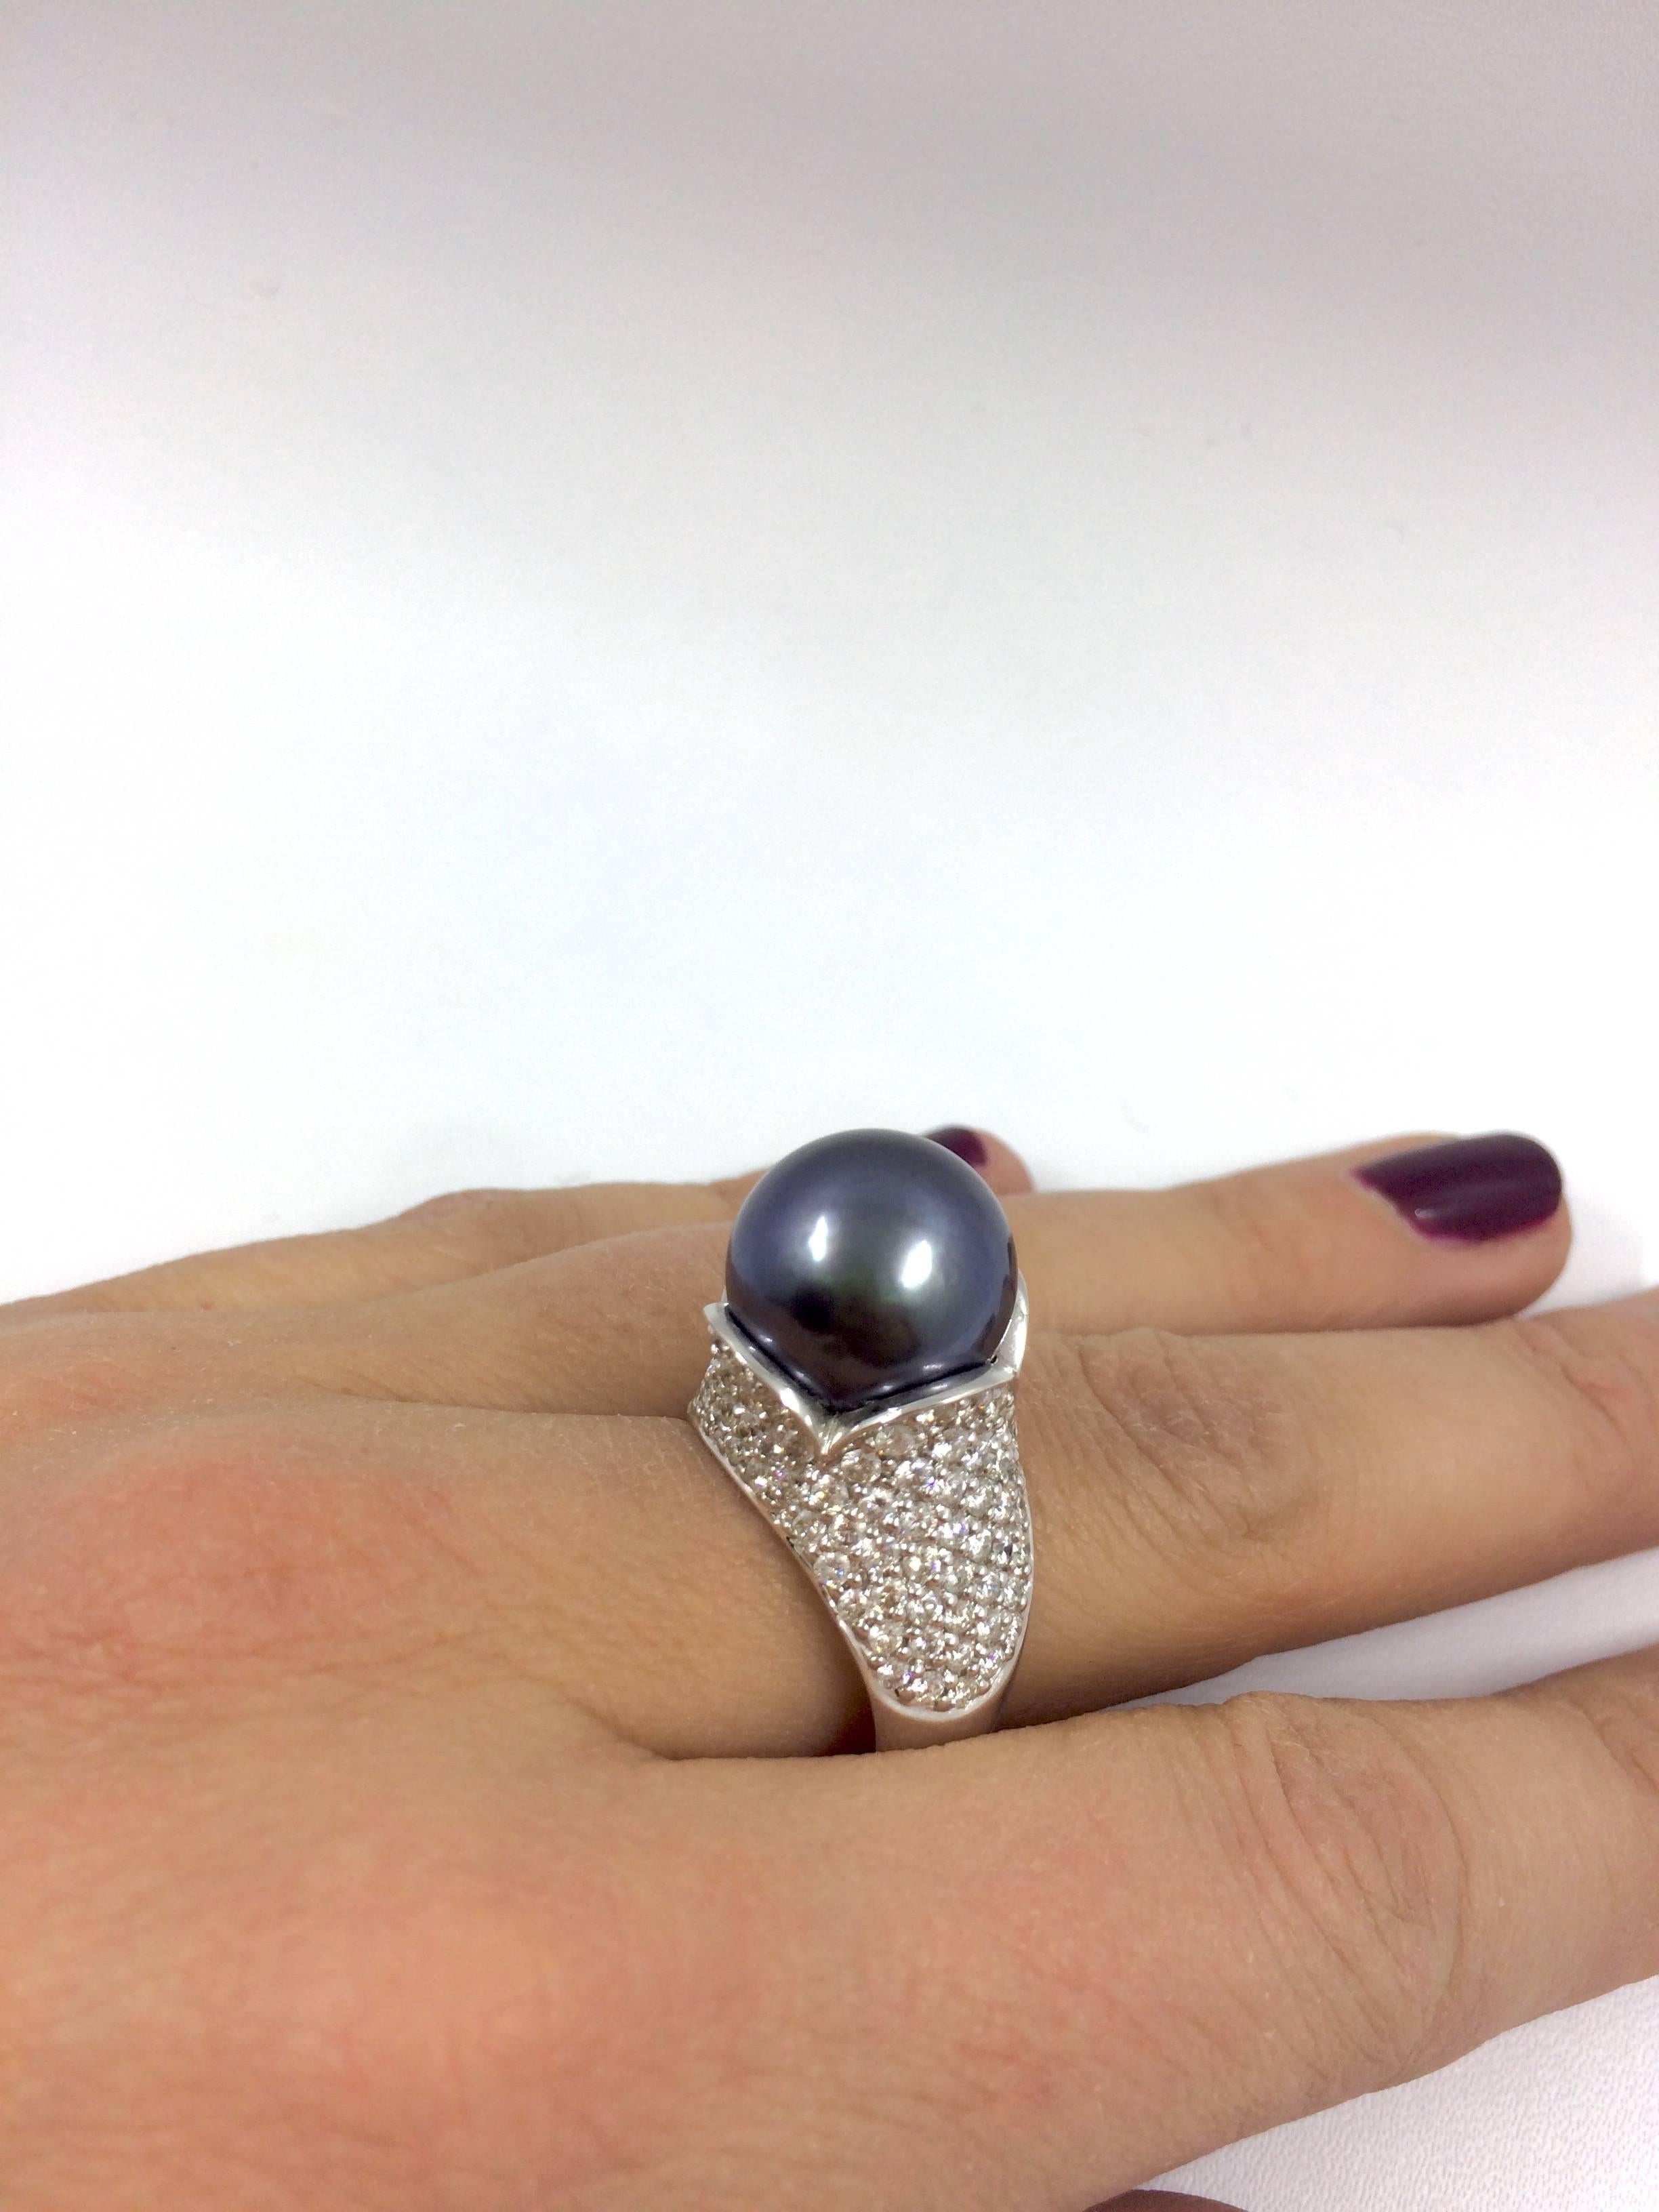 A white gold ring set with a tahitian pearl in the center and 2,36 carat of brilliant cut diamonds surrounding the pearl.  
Pearl diameter : 13 mm  
Quality : AAA, beautiful luster and brilliancy. 
Net Weight: 11,19 grams
Finger Size: 7 (can be